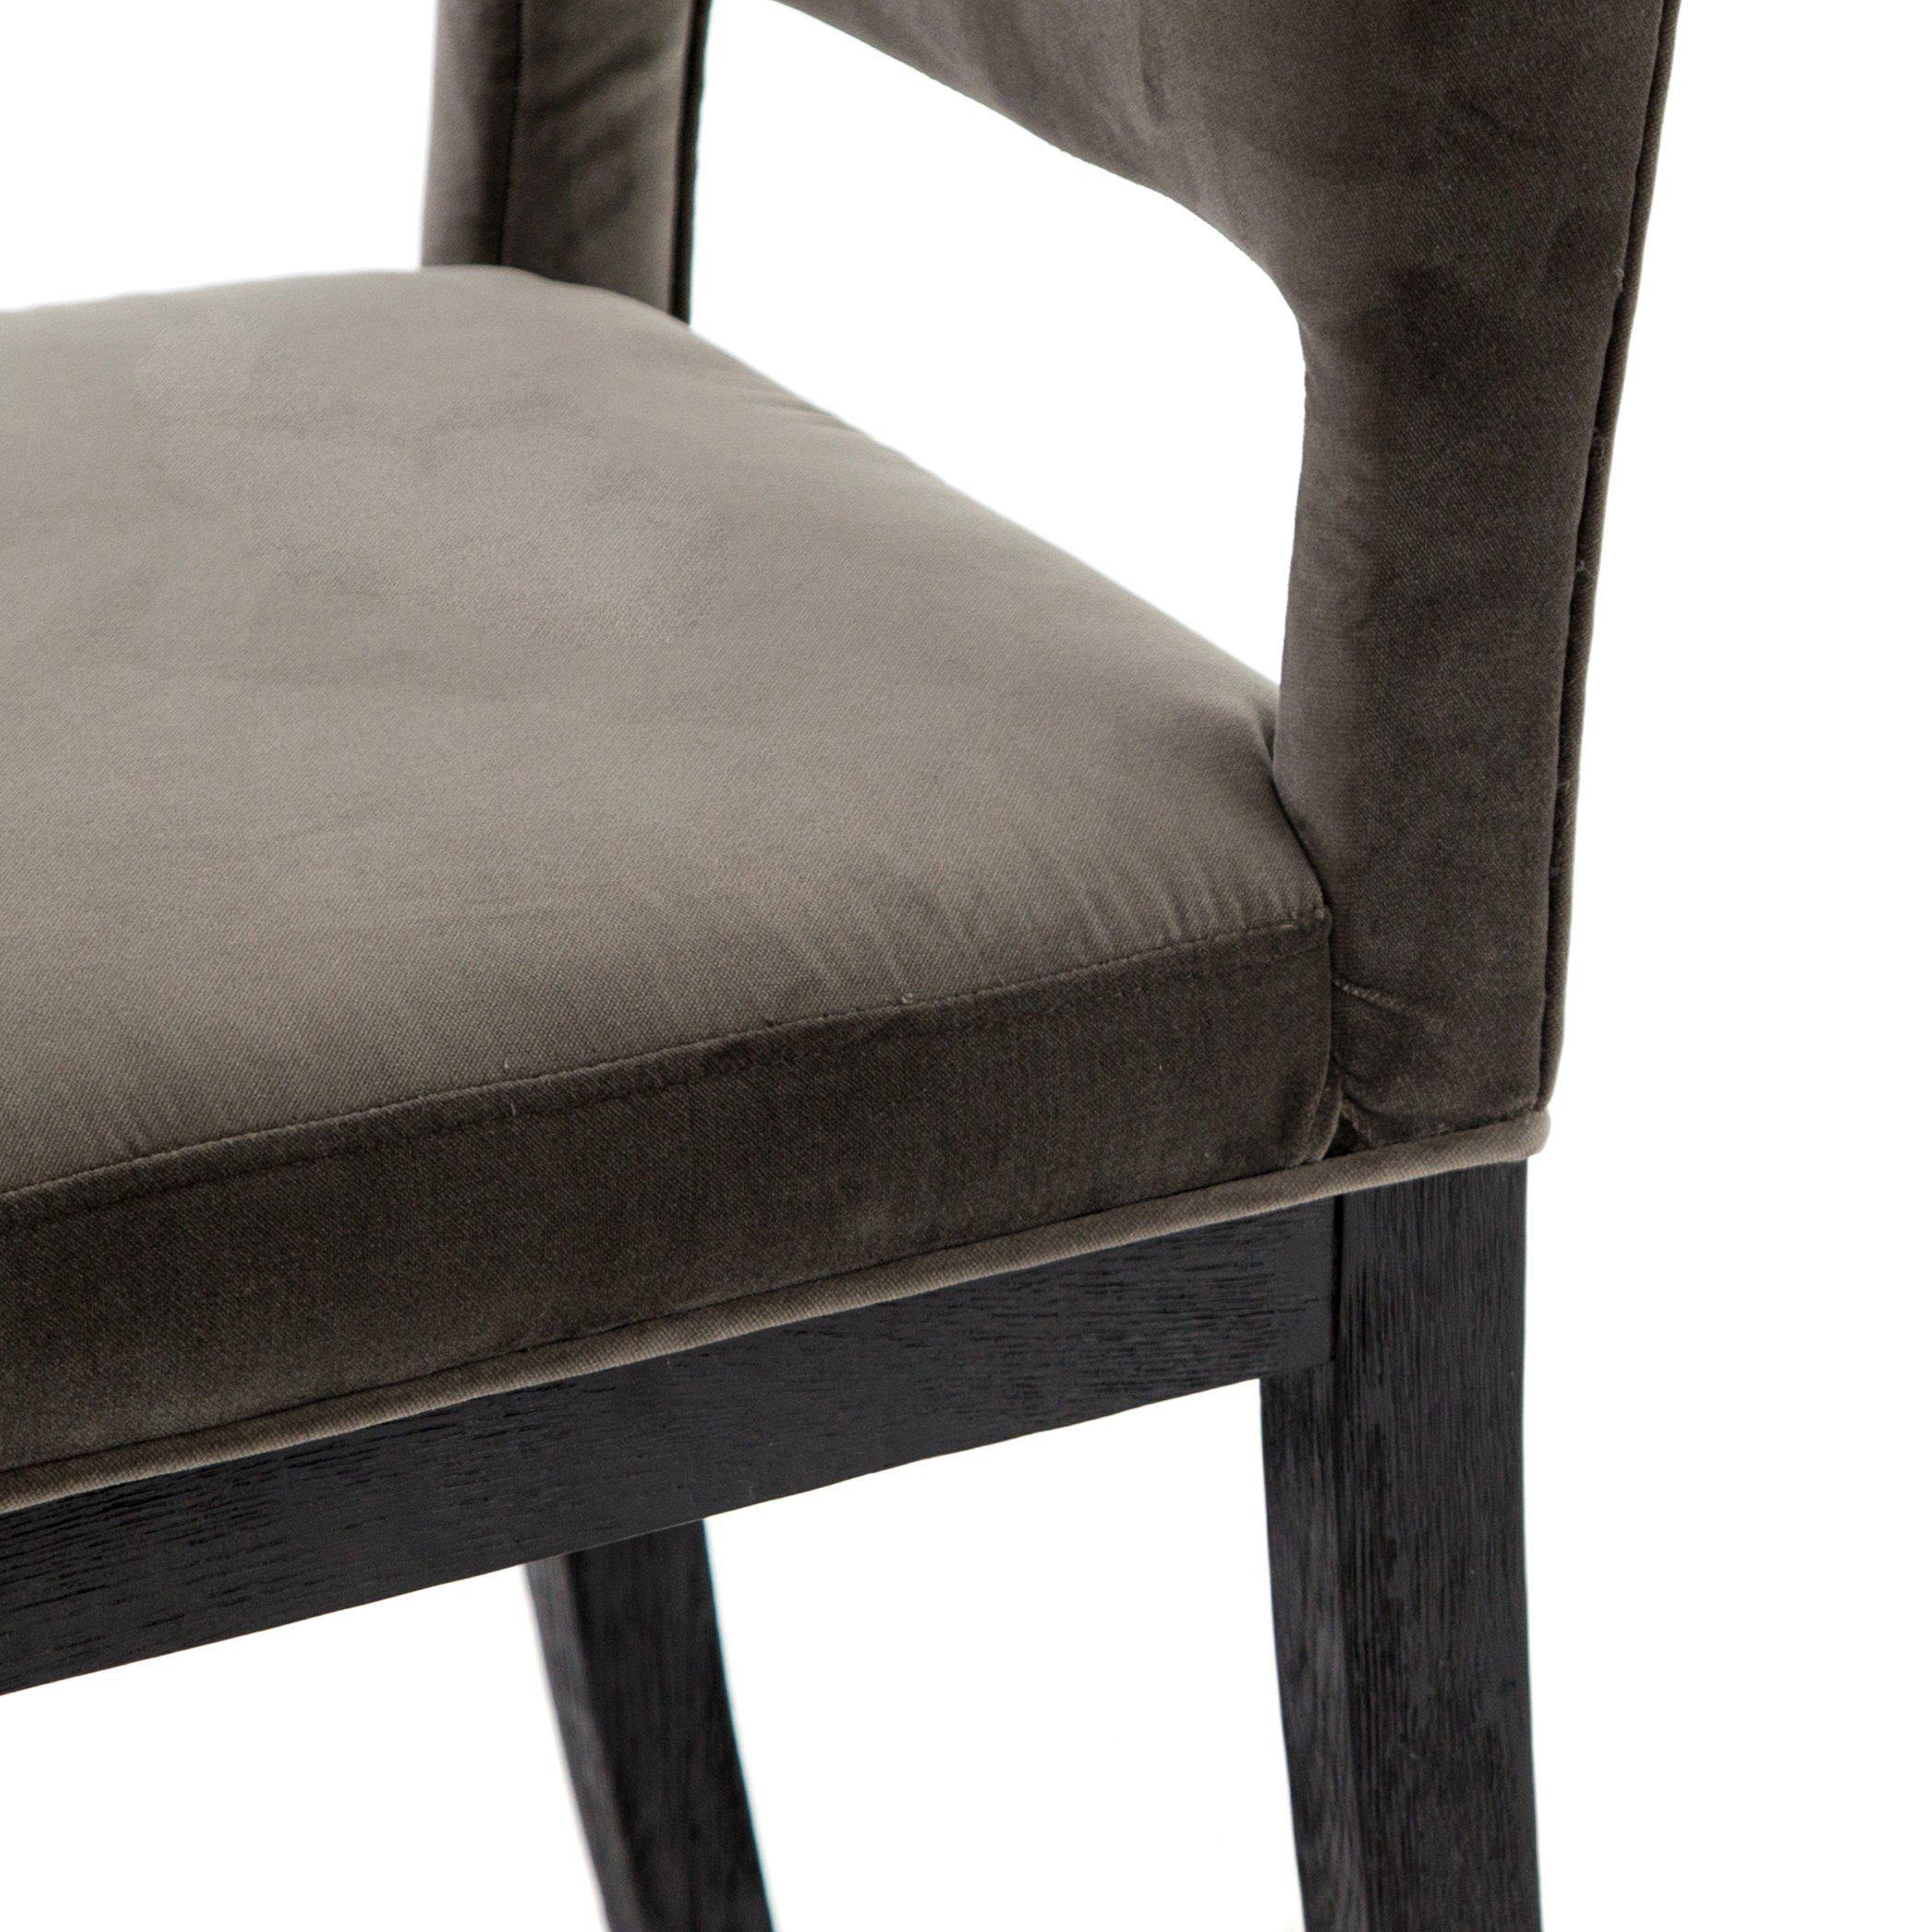 Four Hands FURNITURE - Celia Dining Chair